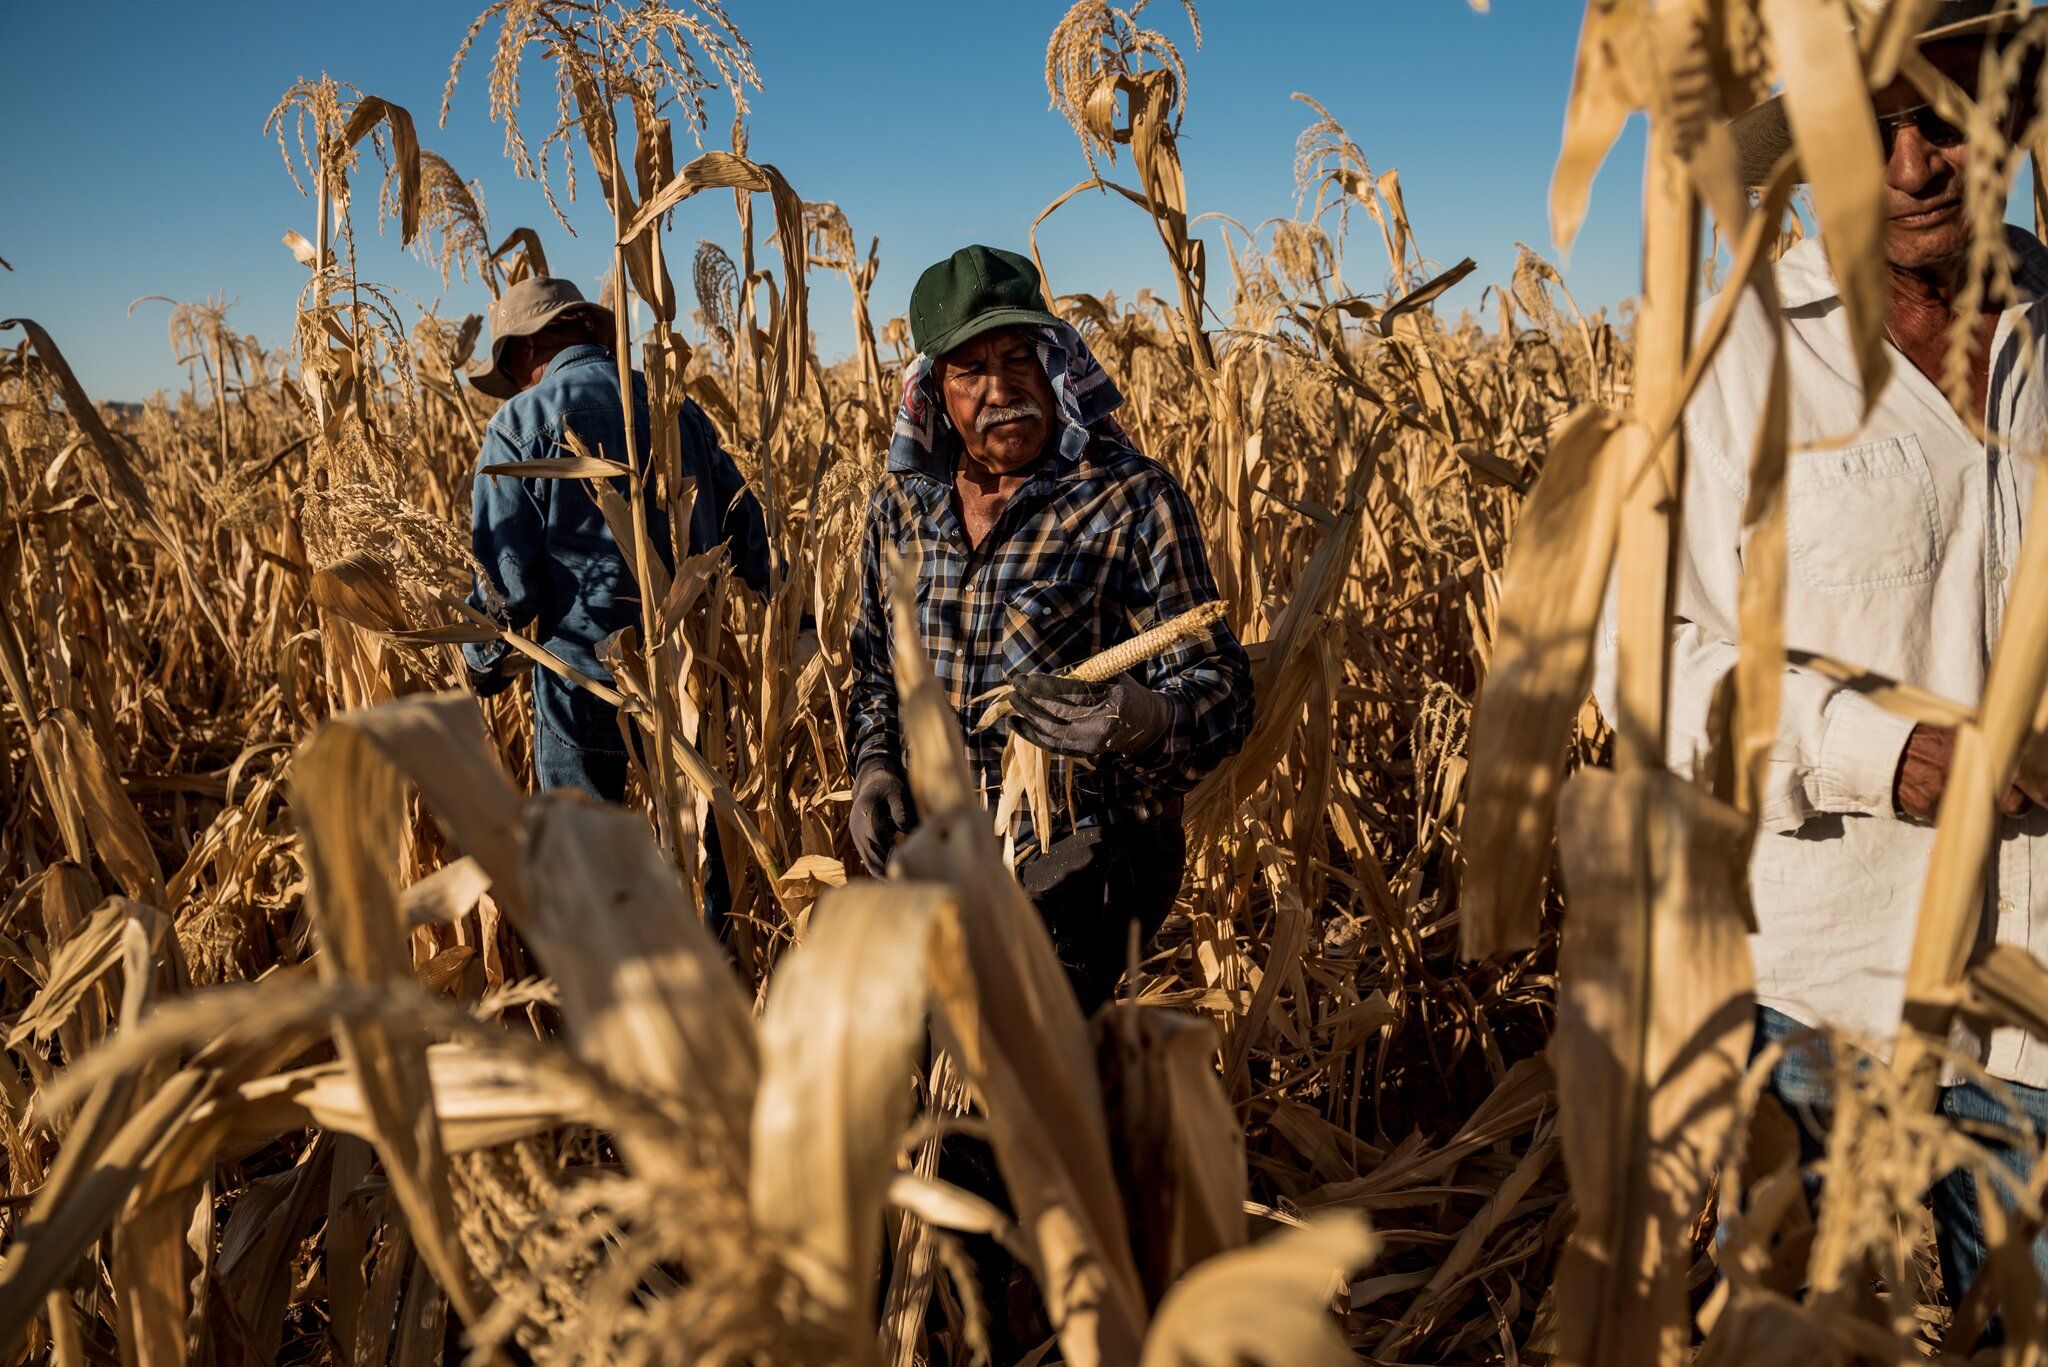 PINAL COUNTY, ARIZ. Pedro Delgado harvesting a cob of blue corn that grew without kernels at Ramona Farms last month. Image by Meridith Kohut. United States, 2020.